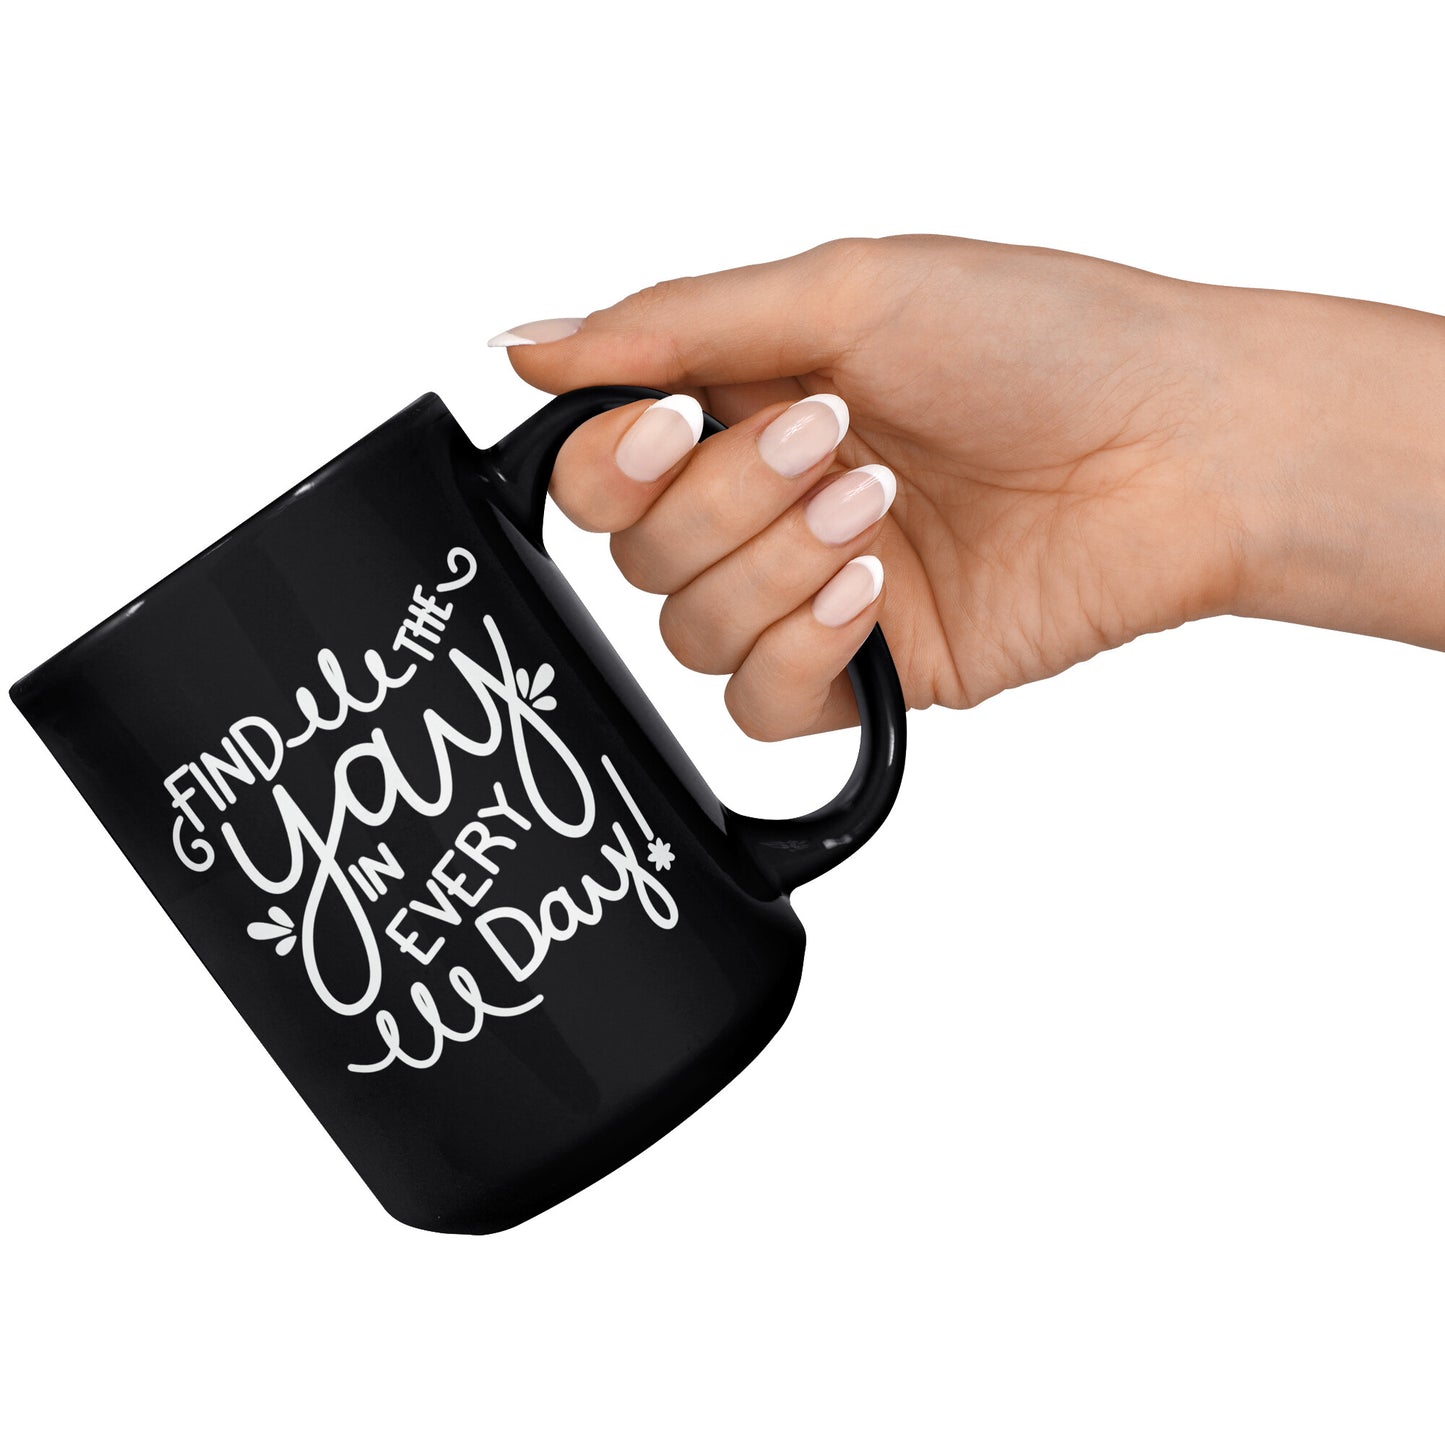 Find the Yay in Every Day 15 Oz. Mug